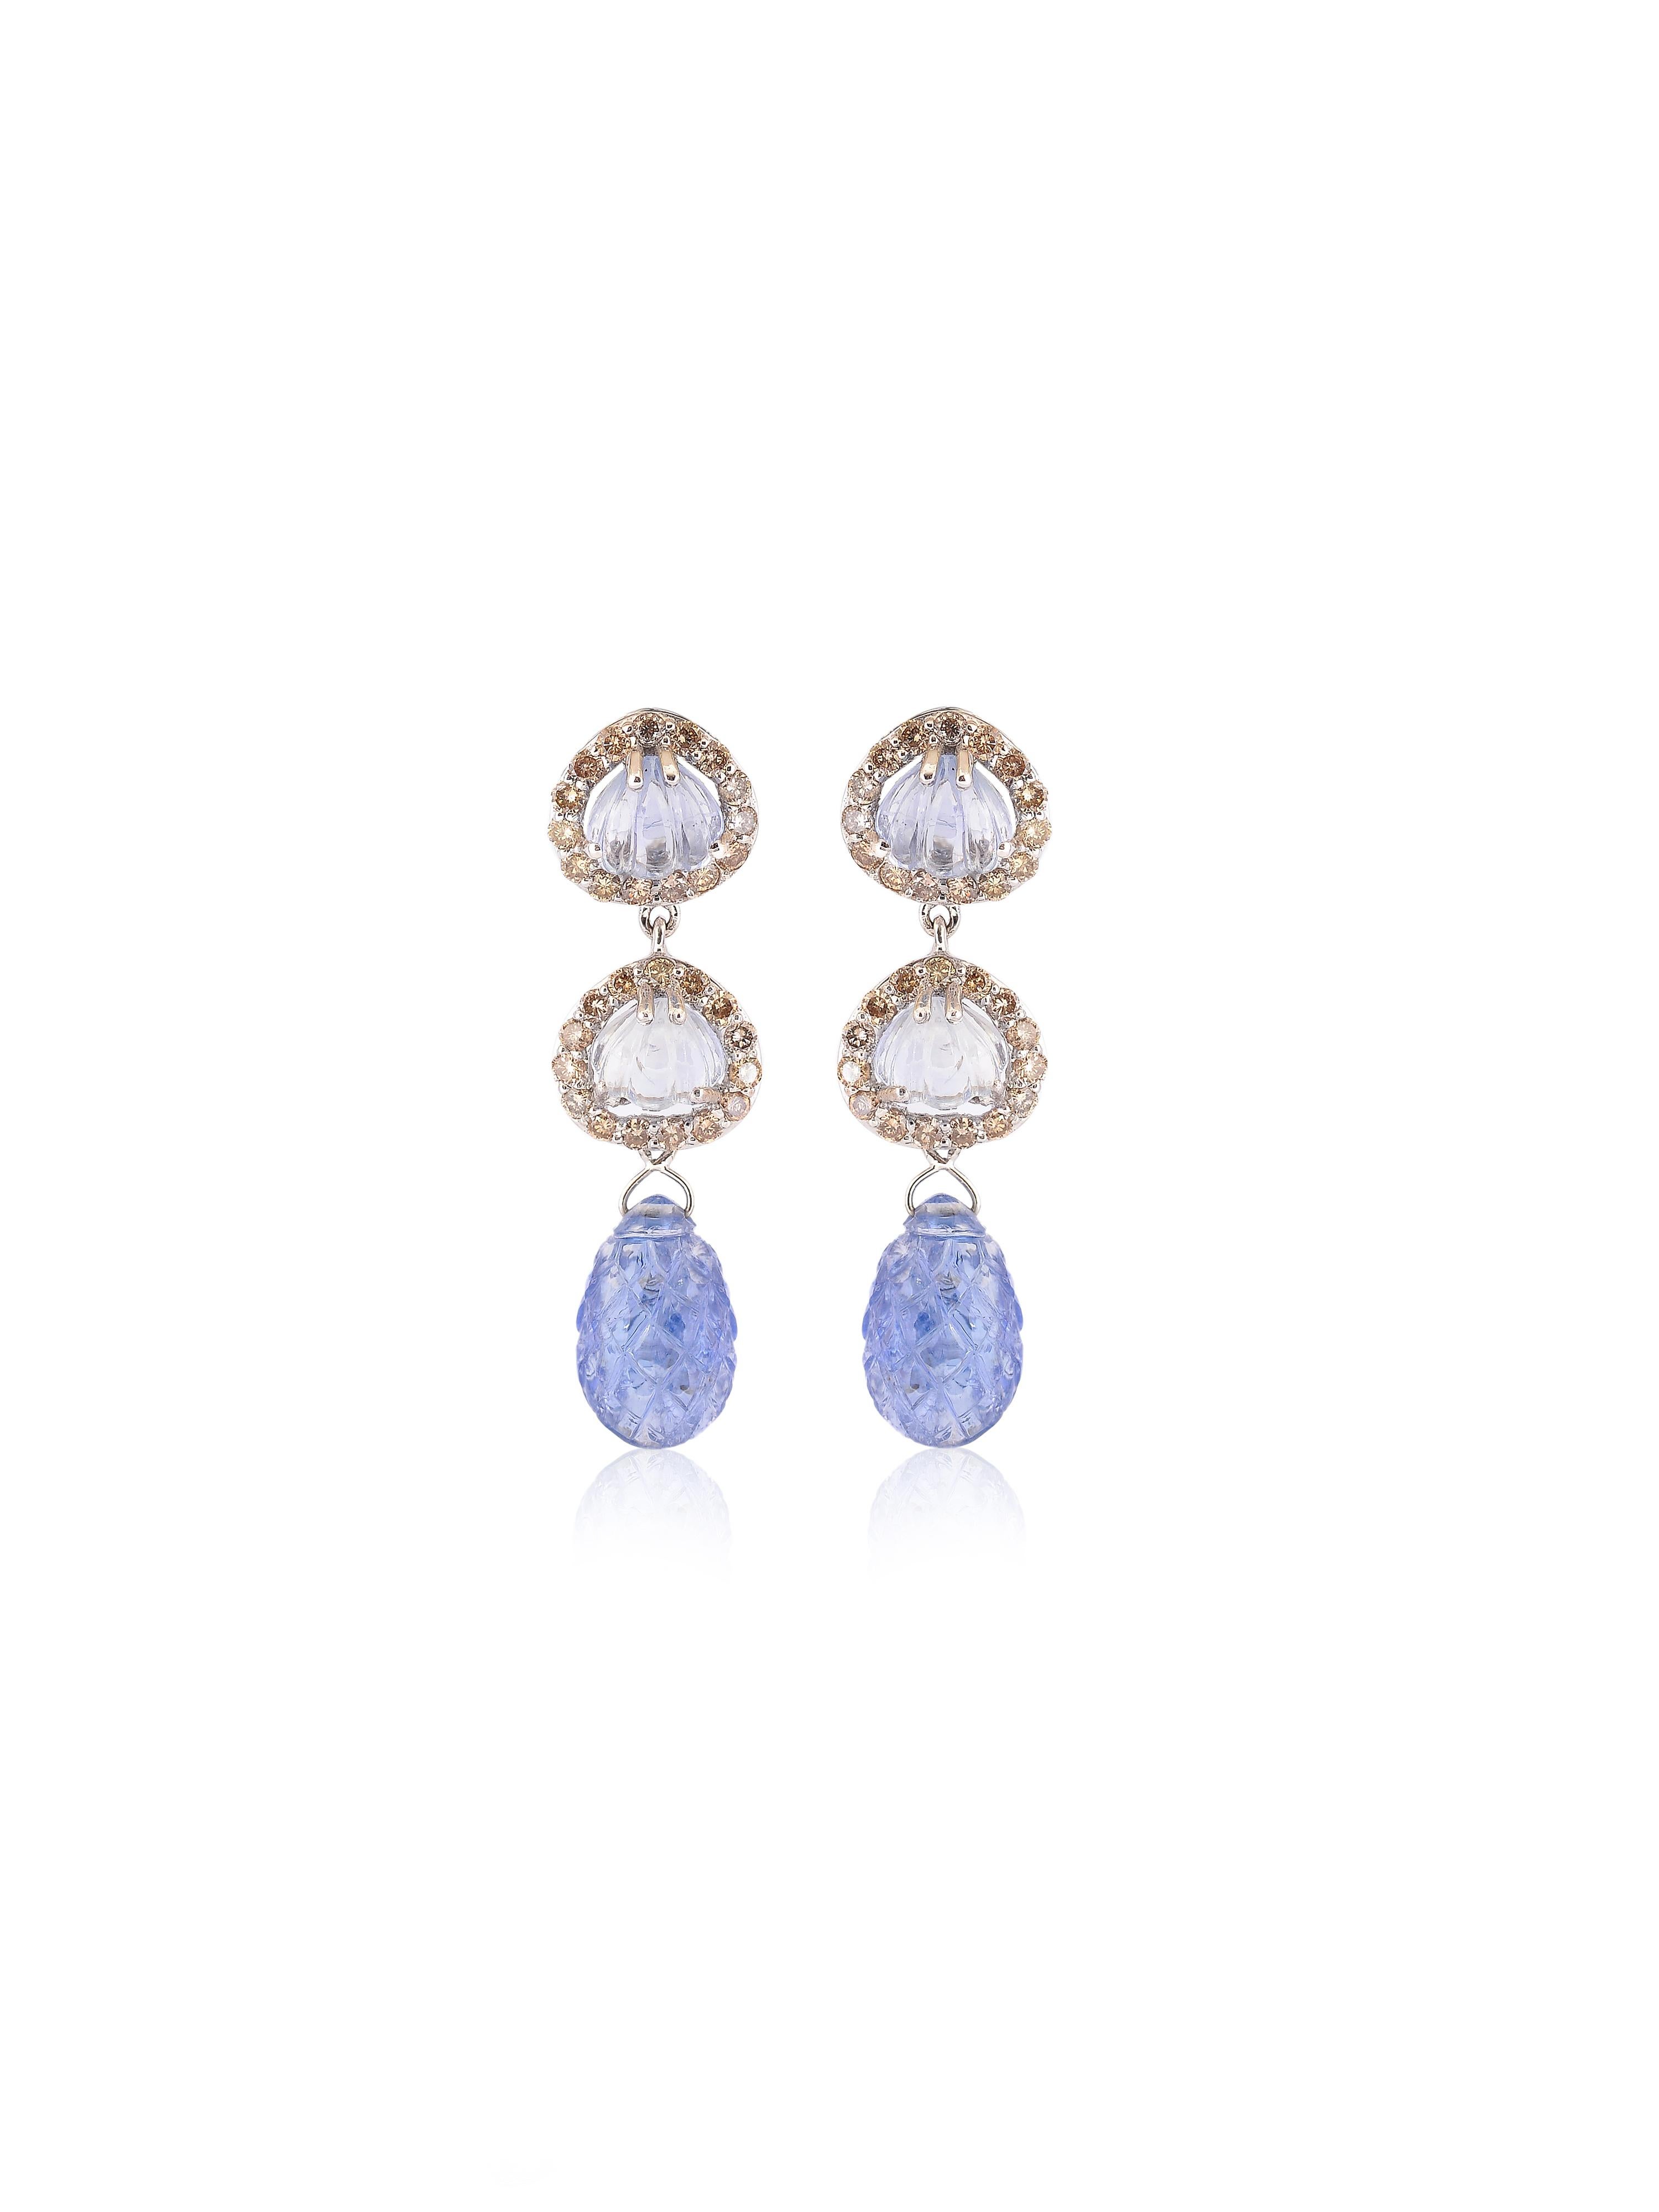 Cabochon Exquisite 16.49 Carats Natural Carved Sapphire Dangling Earring Pair For Sale